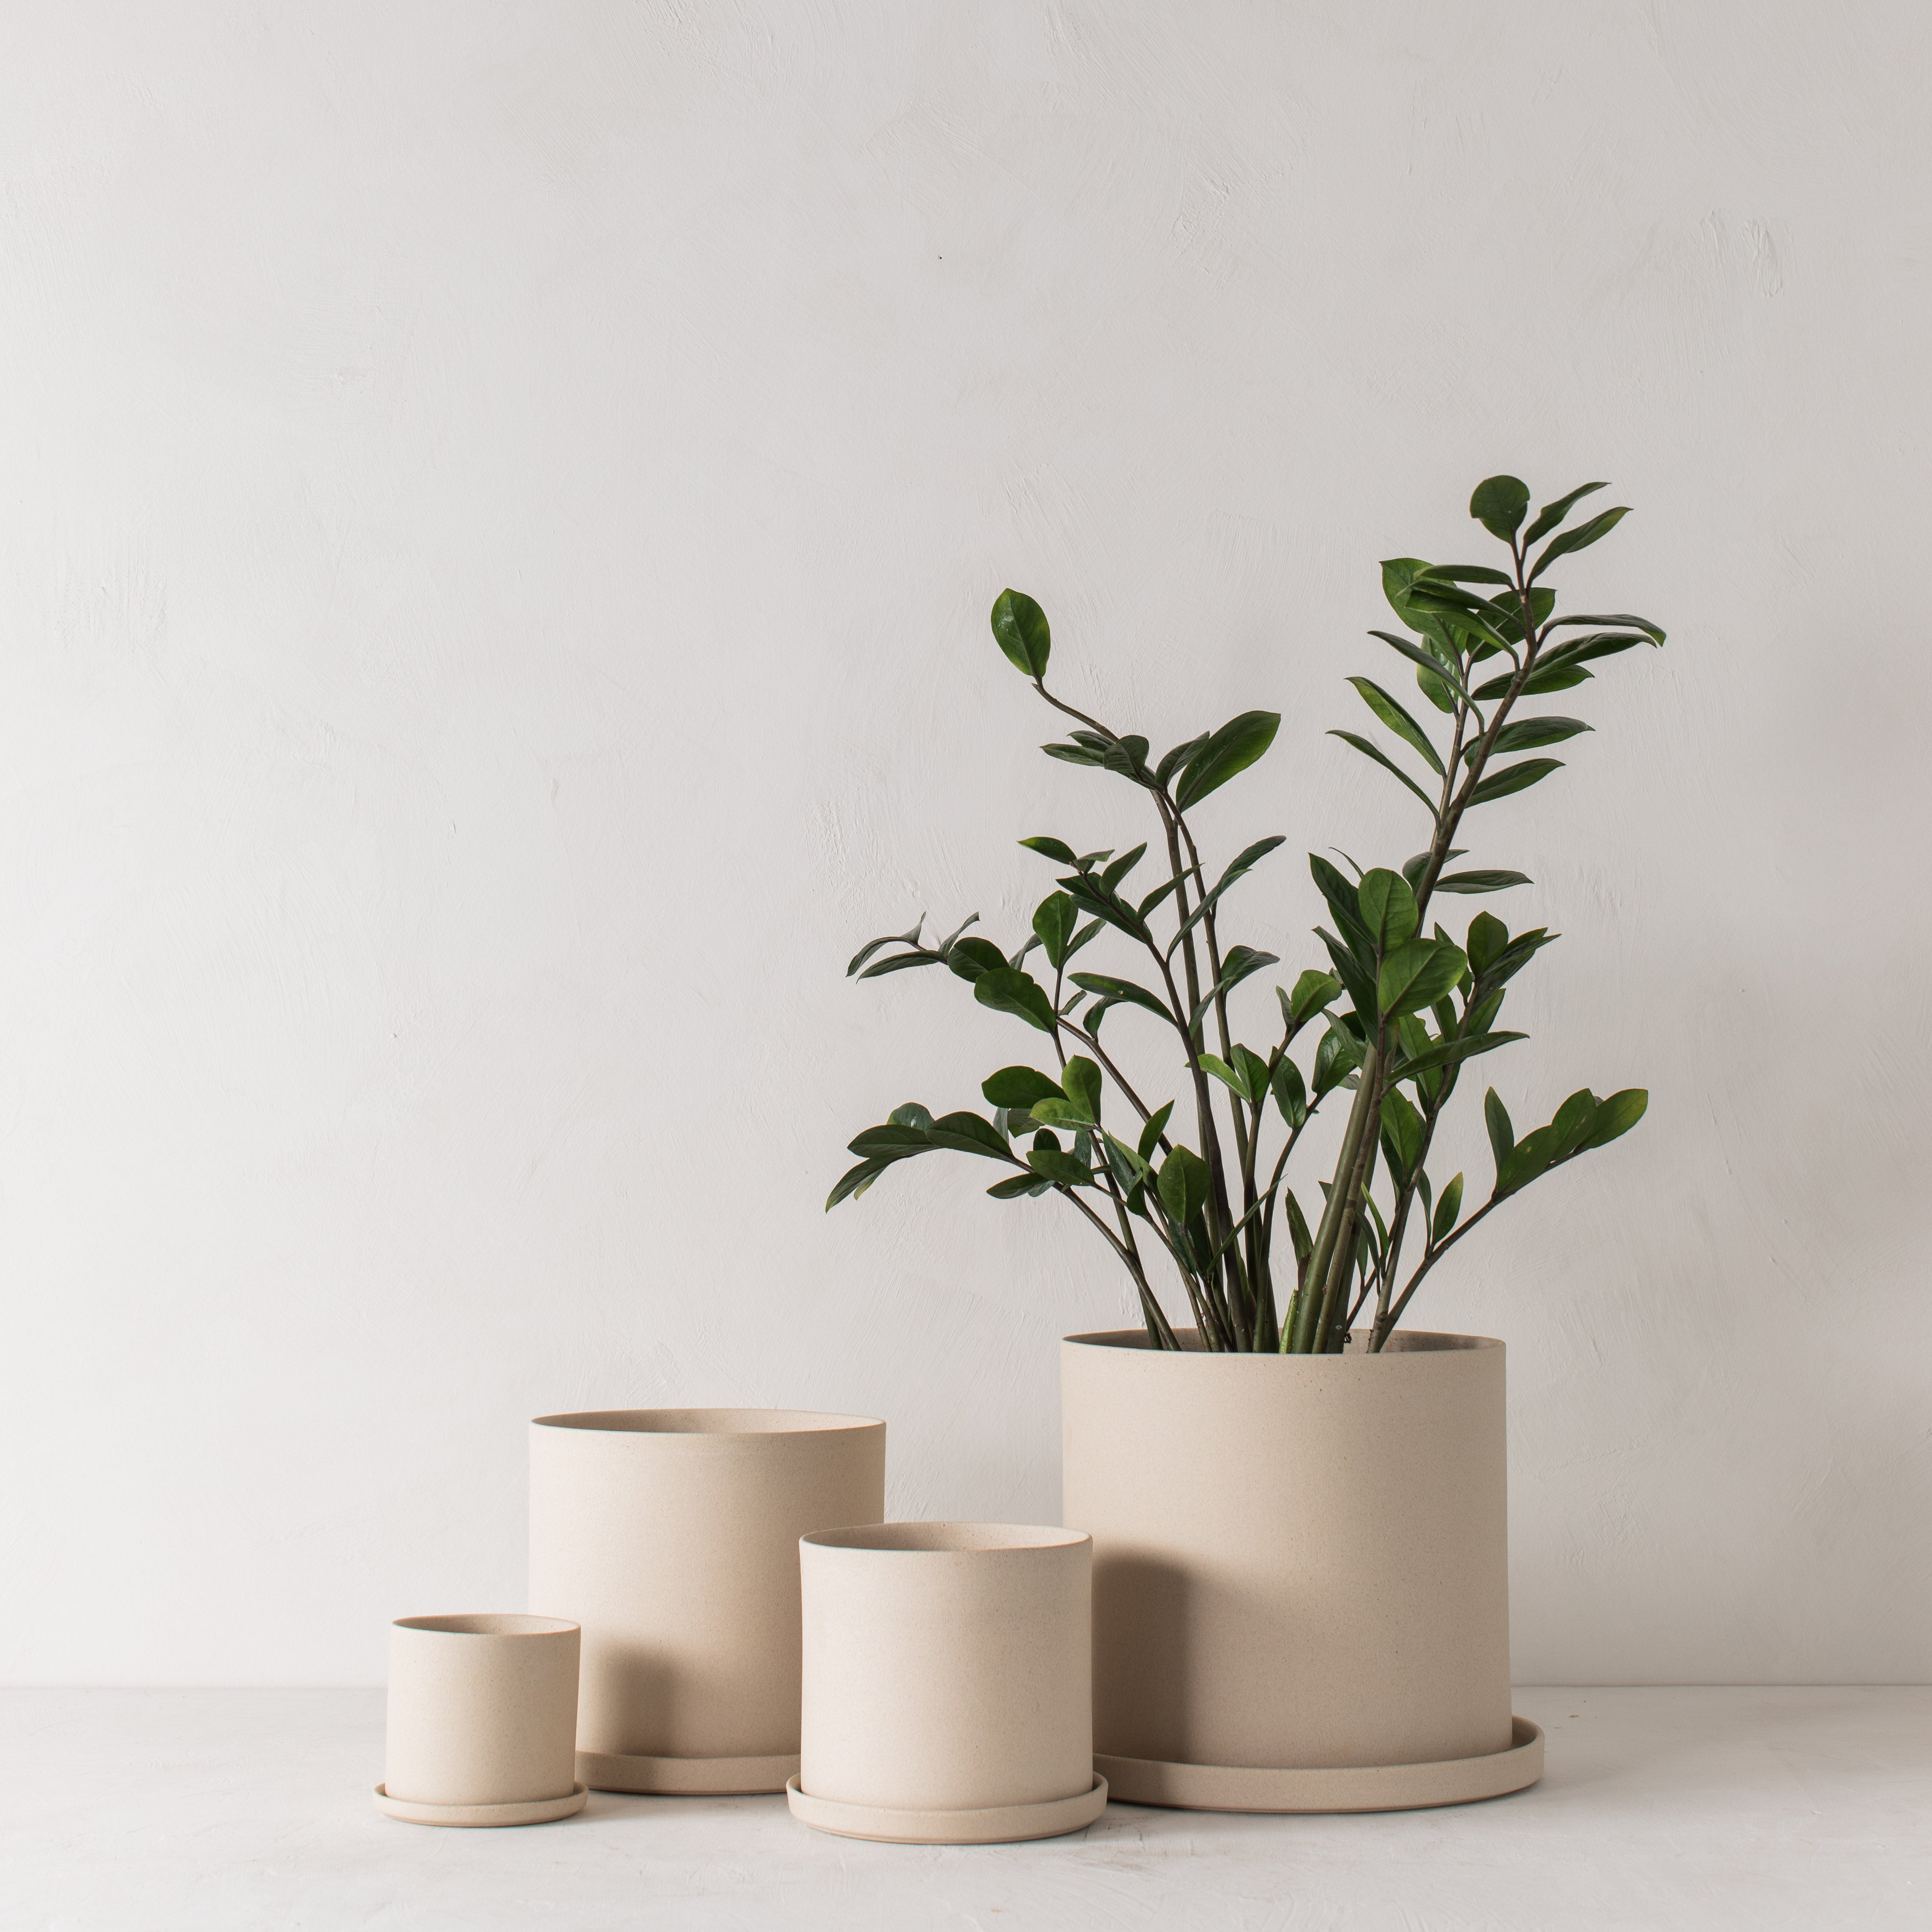 Four stoneware ceramic planters with bottom drainage dishes,4, 6, 8, and 10 inches. Staged on a white plaster textured tabletop against a plaster textured white wall. Large tall zz plant inside the 10 inch. Designed and sold by Convivial Production, Kansas City Ceramics.